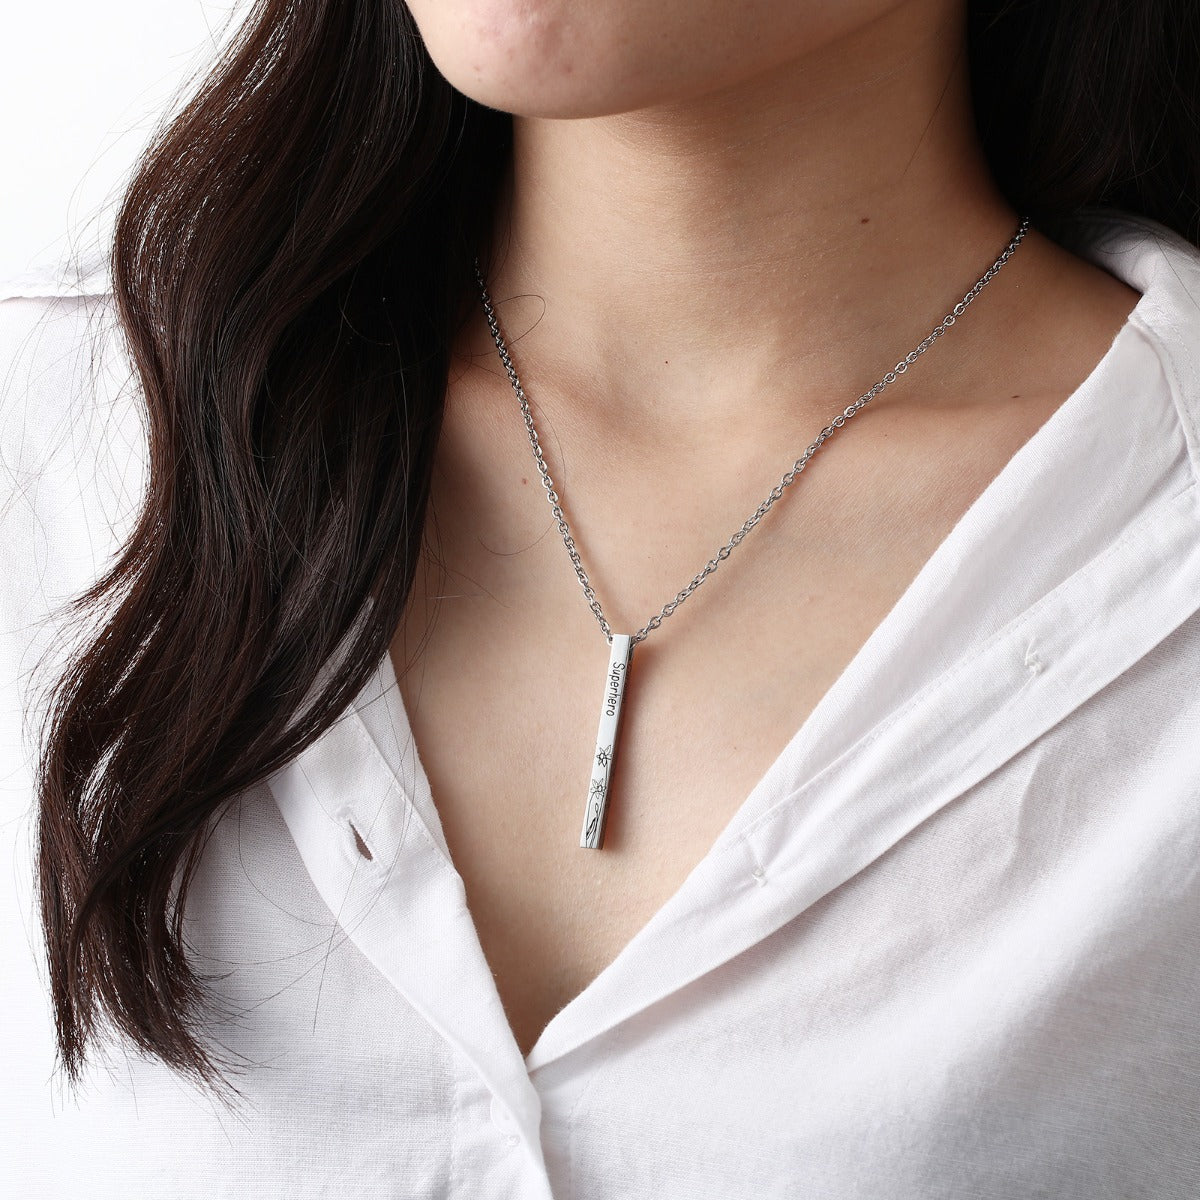 Personalized Sainless Steal Vertical Bar Necklace